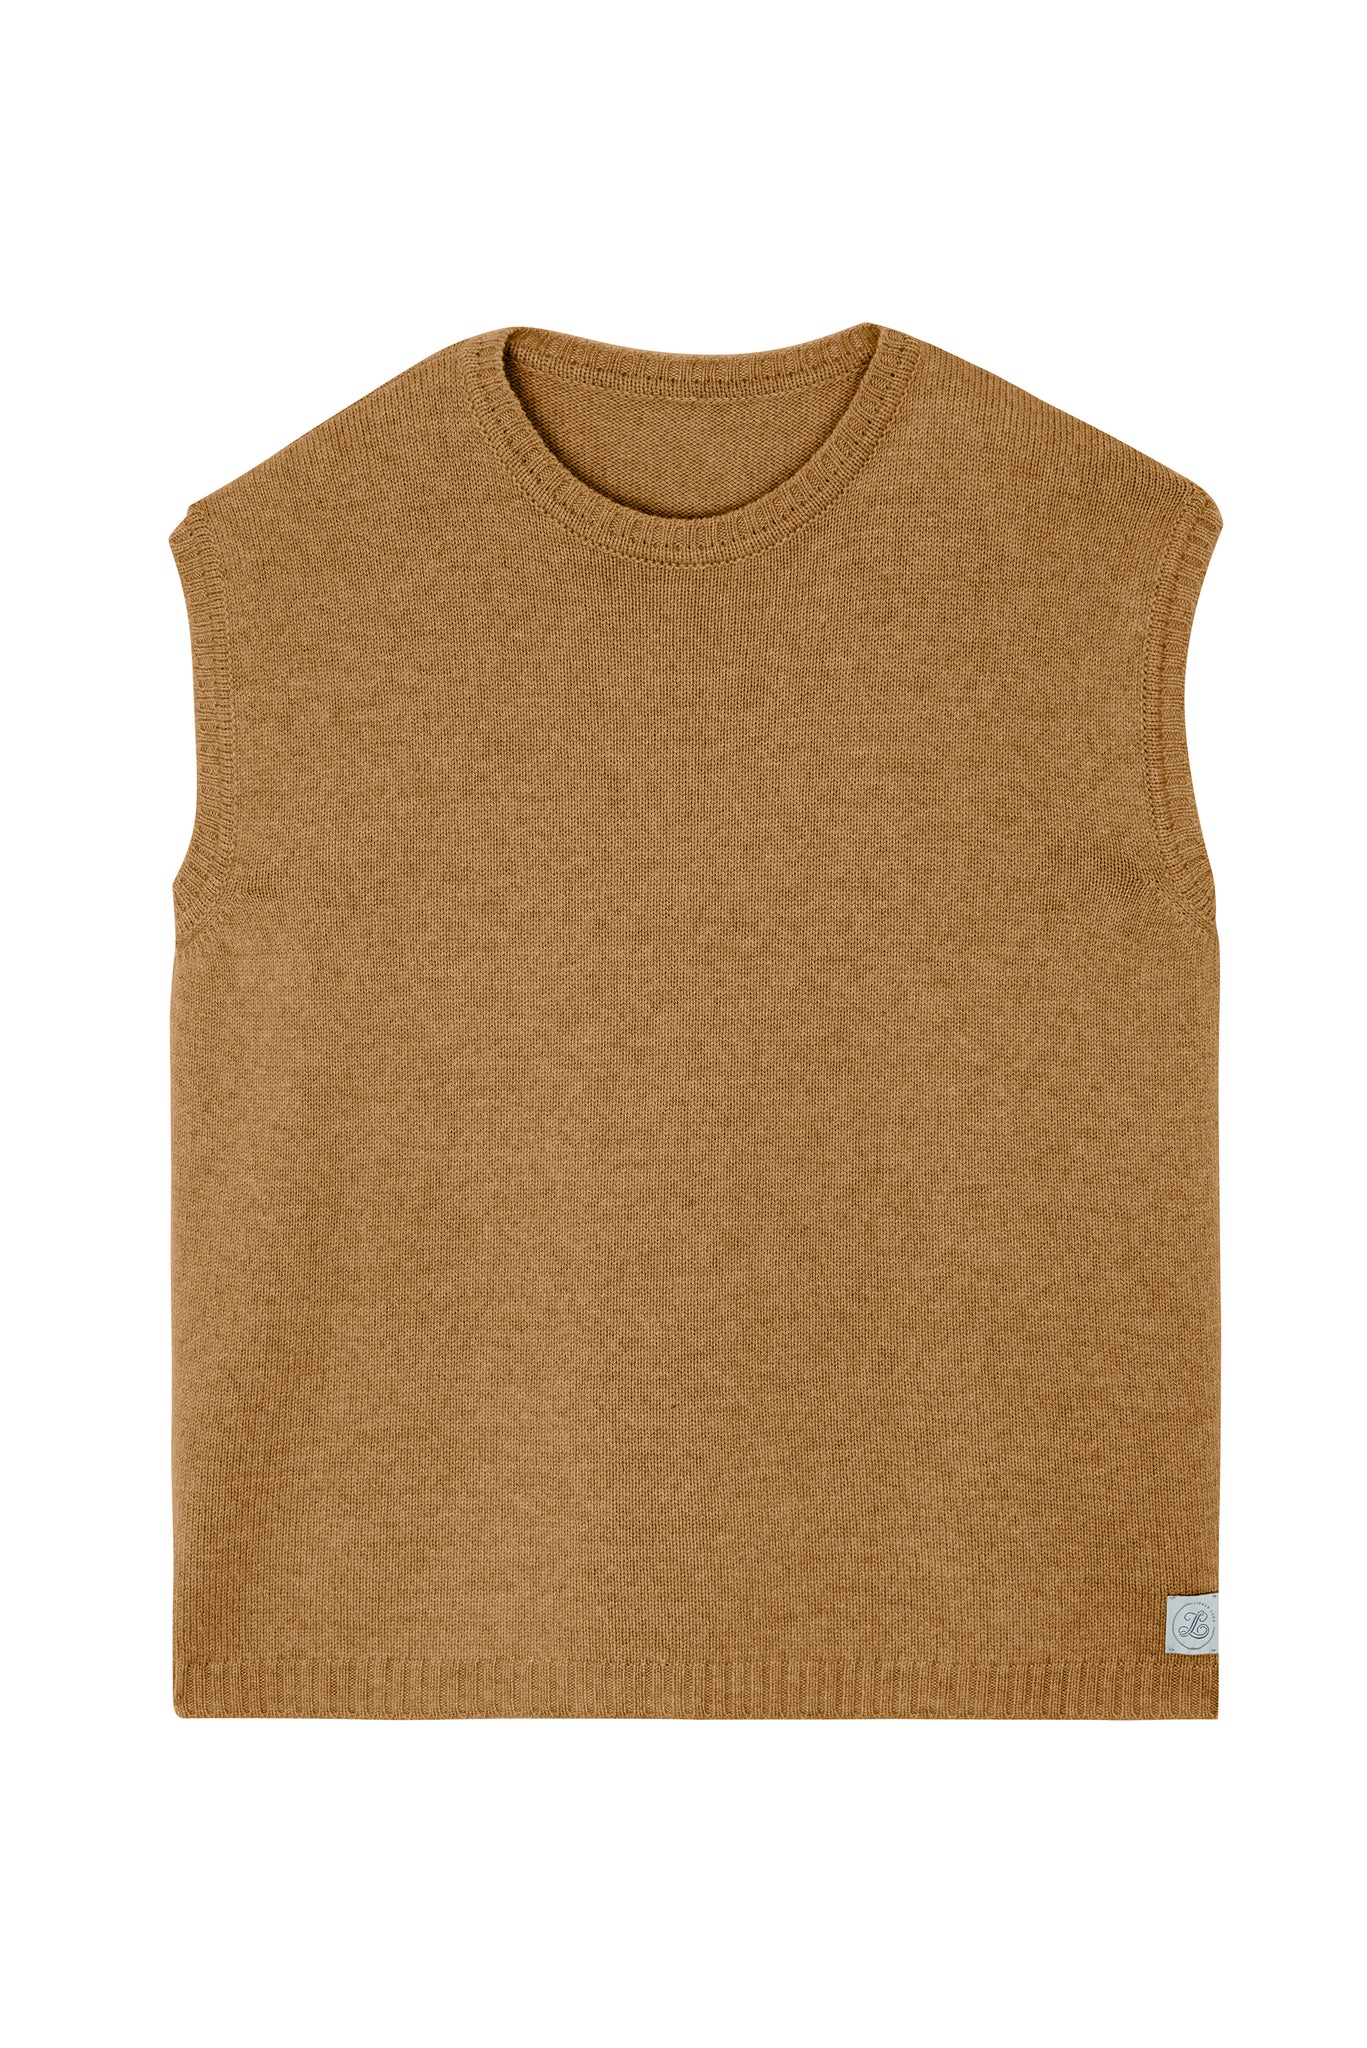 Brown sleeveless cashmere sweater for layering